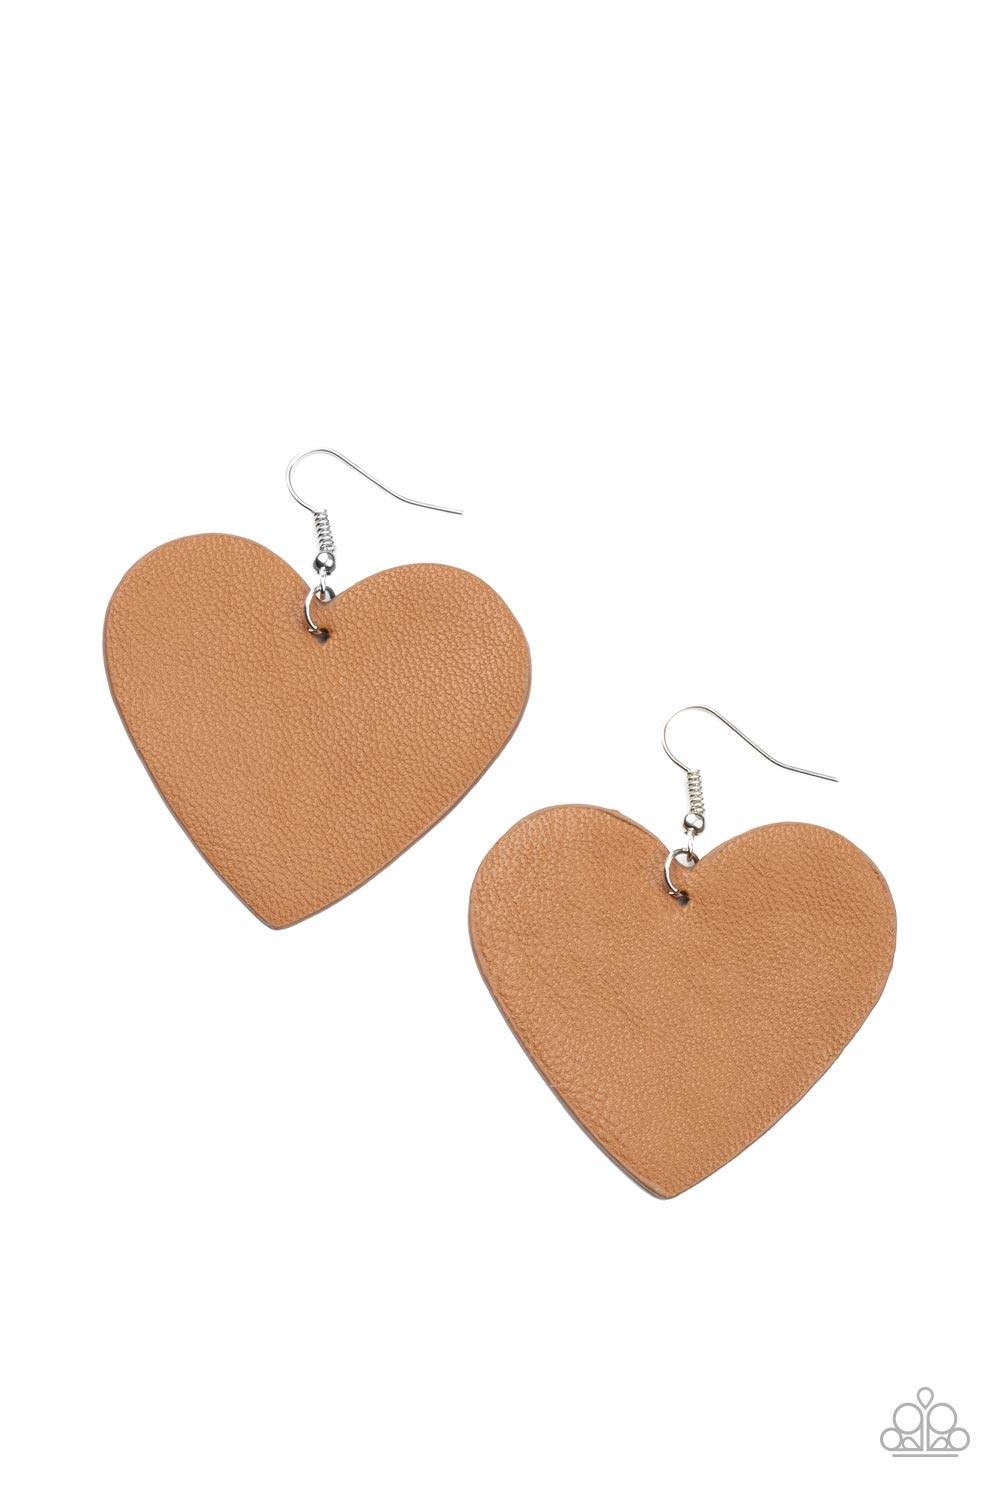 Paparazzi Accessories Country Crush - Brown A tan leather heart frame swings from the ear for a flirtatiously neutral pop of color. Earring attaches to a standard fishhook fitting. Sold as one pair of earrings. Jewelry